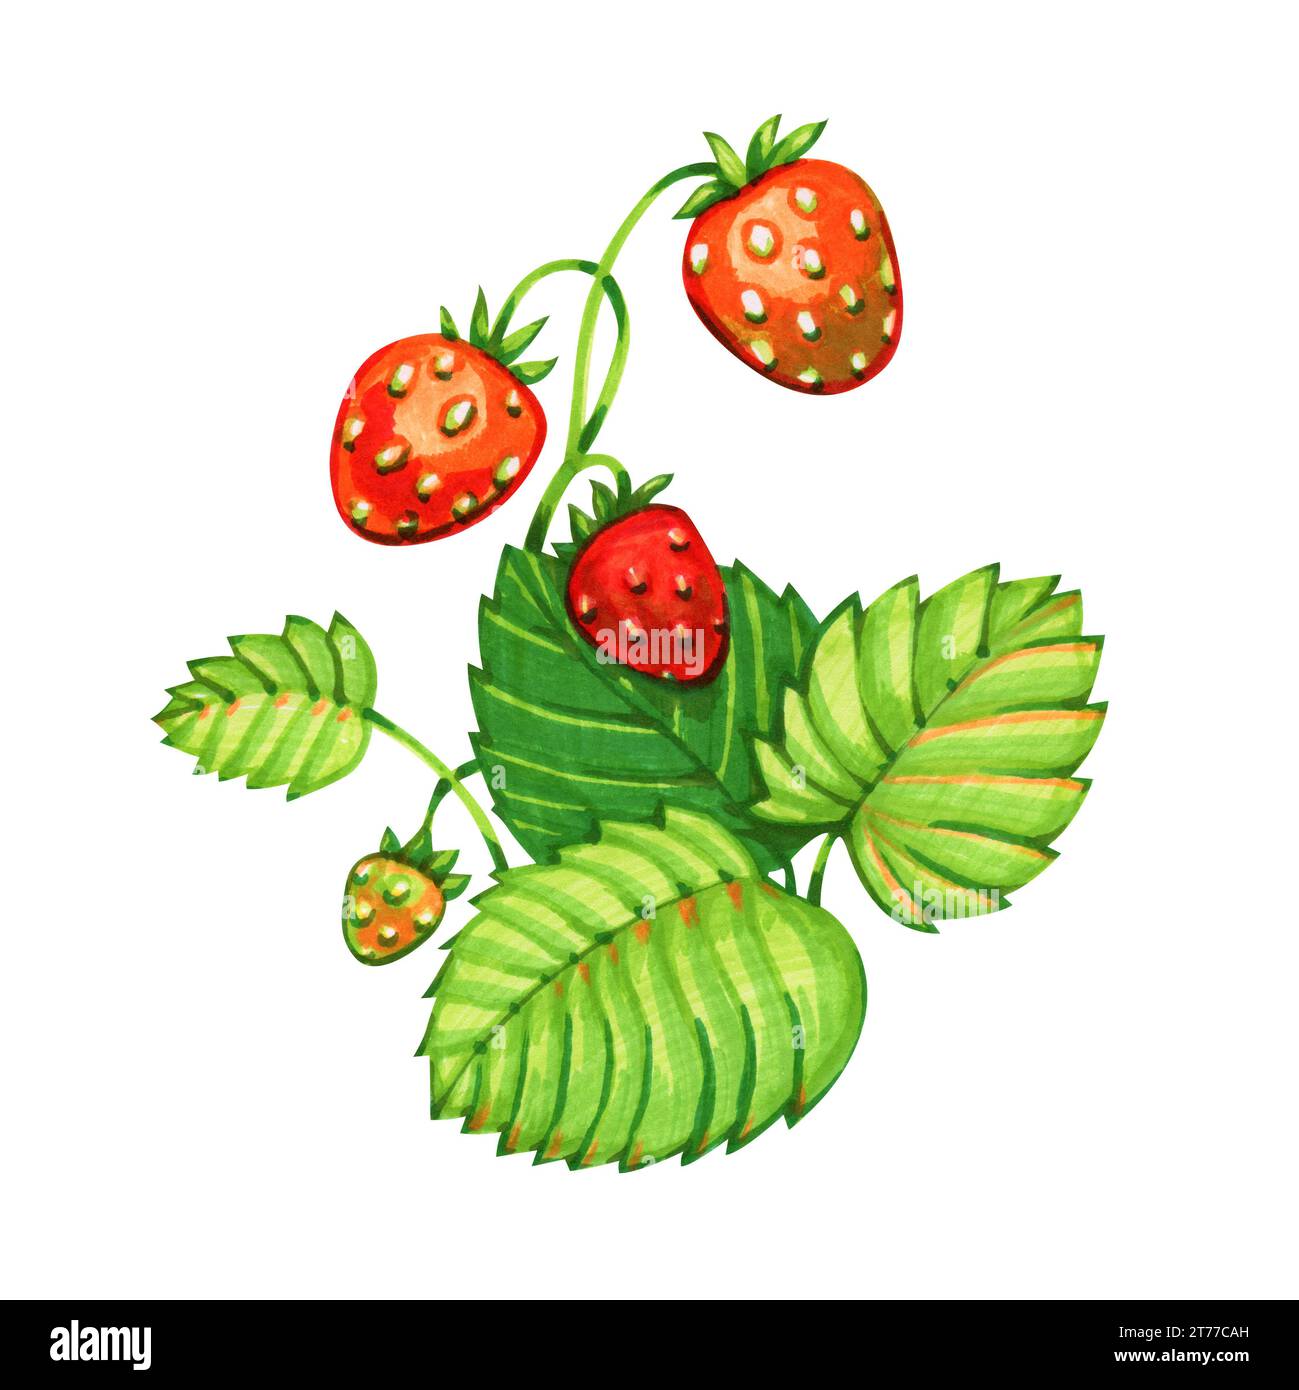 Botanical marker sketch - forest strawberries. Watercolor style Illustration isolated on white. Stock Photo